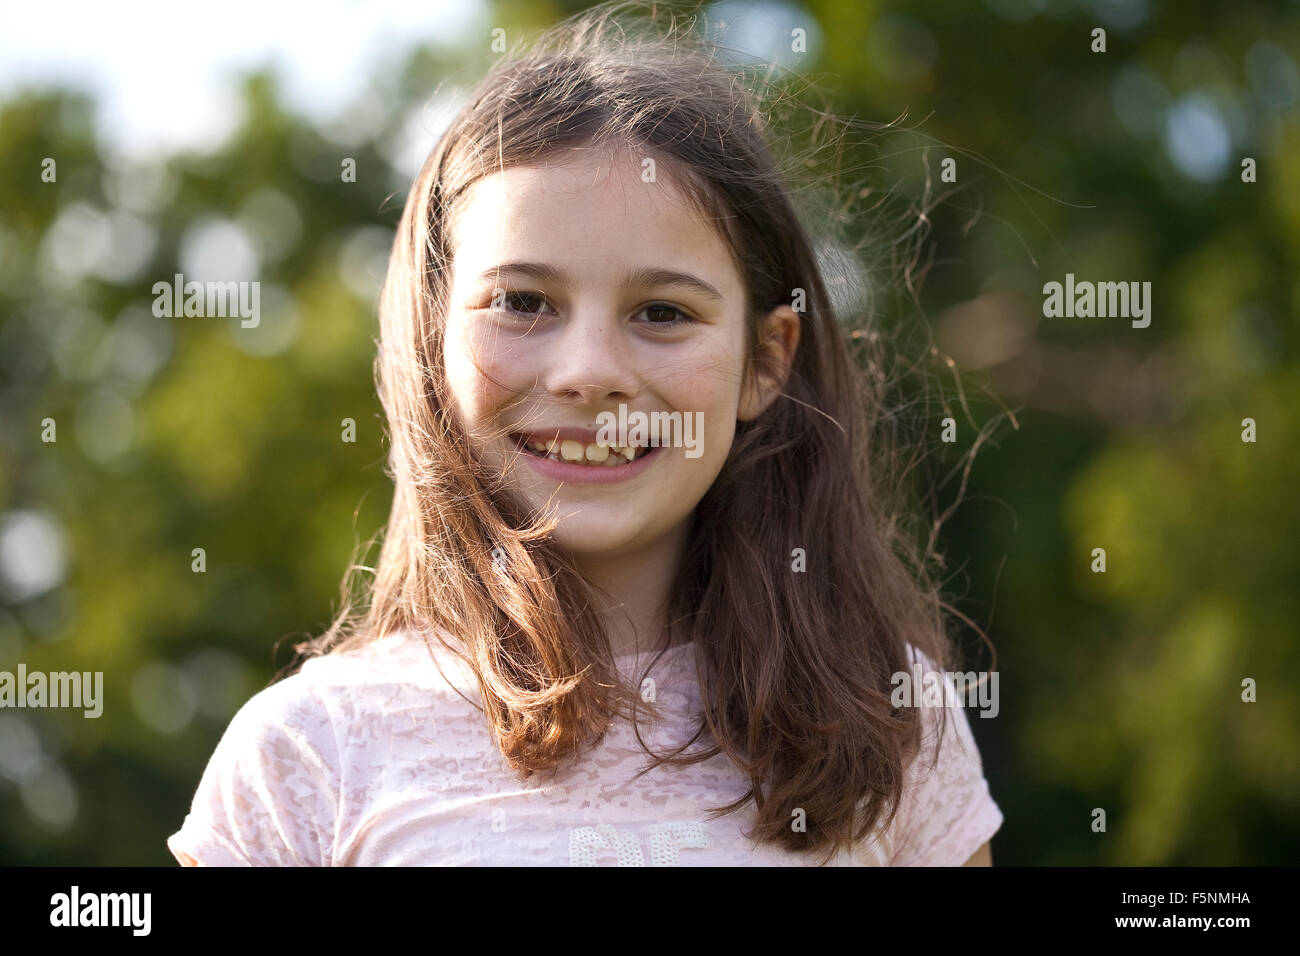 A young girl is smiling down at the camera. Her fine dark hair is dancing around her face. She has dark eyes and a big smile. Stock Photo